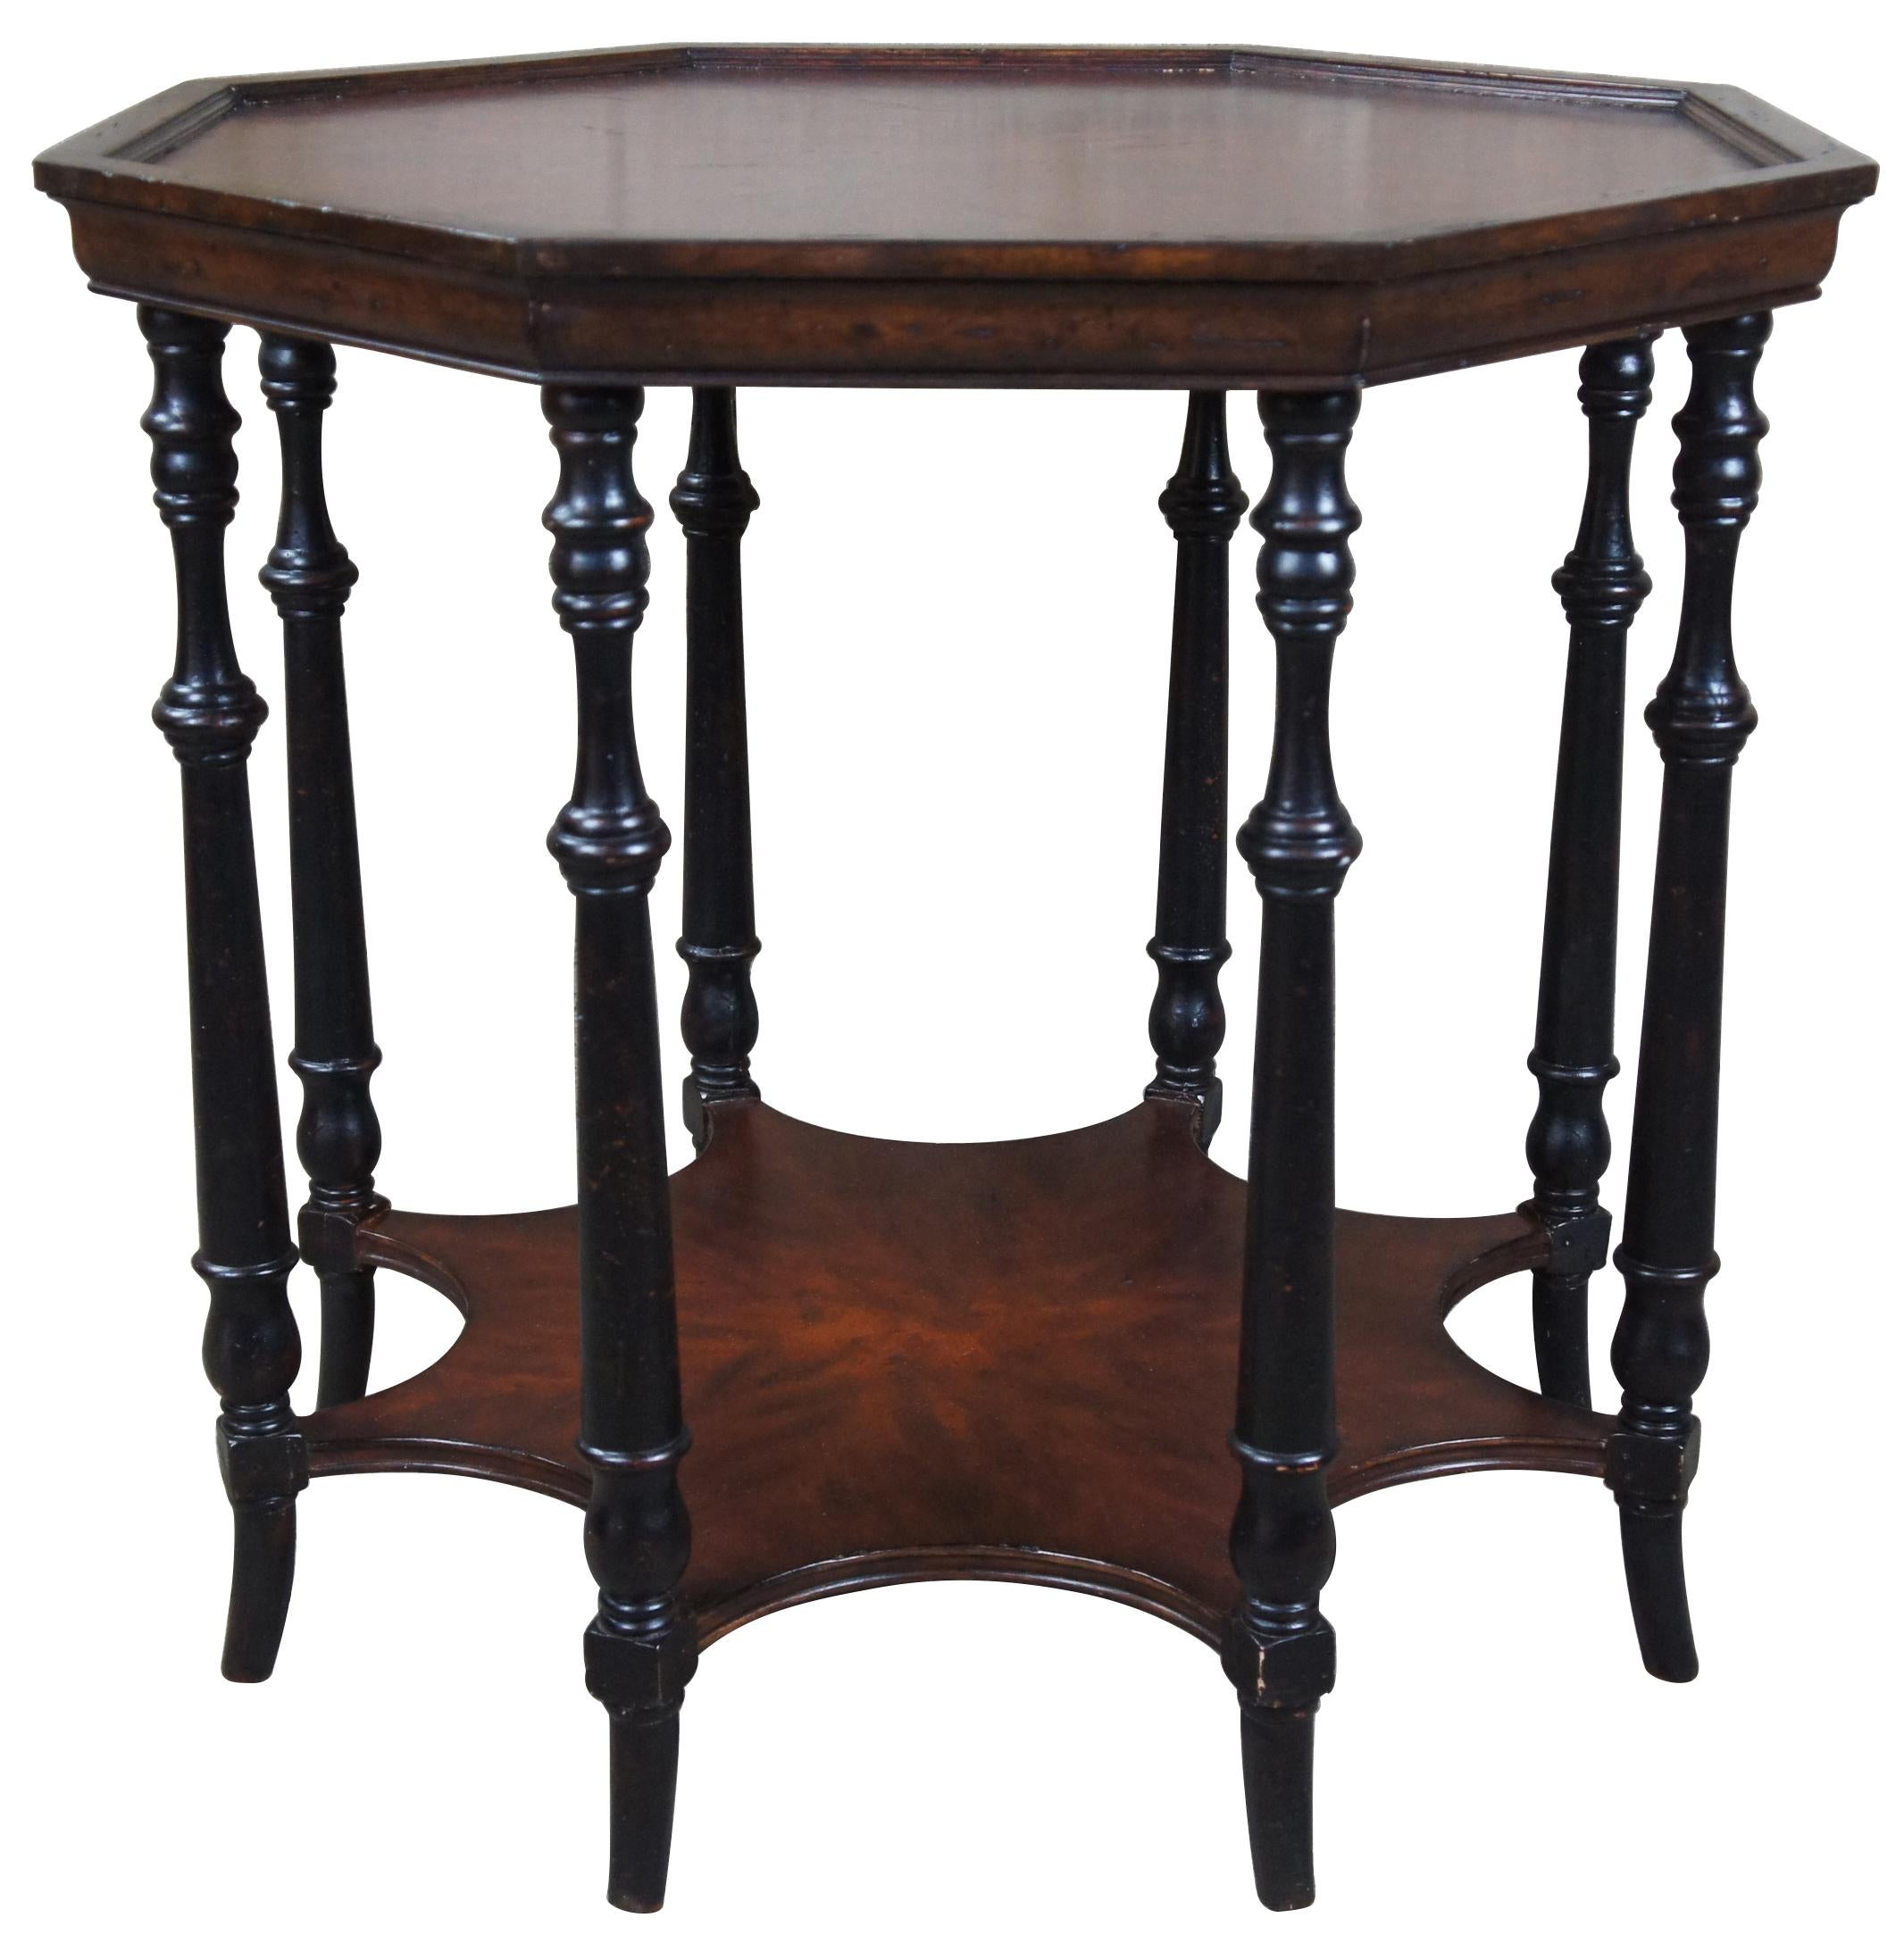 Late 20th century Theodore Alexander two tiered table. Features a matchbook veneered inset top over eight ebonized legs and lower spider web shaped shelf.
  
Corner to Corner - 32.75